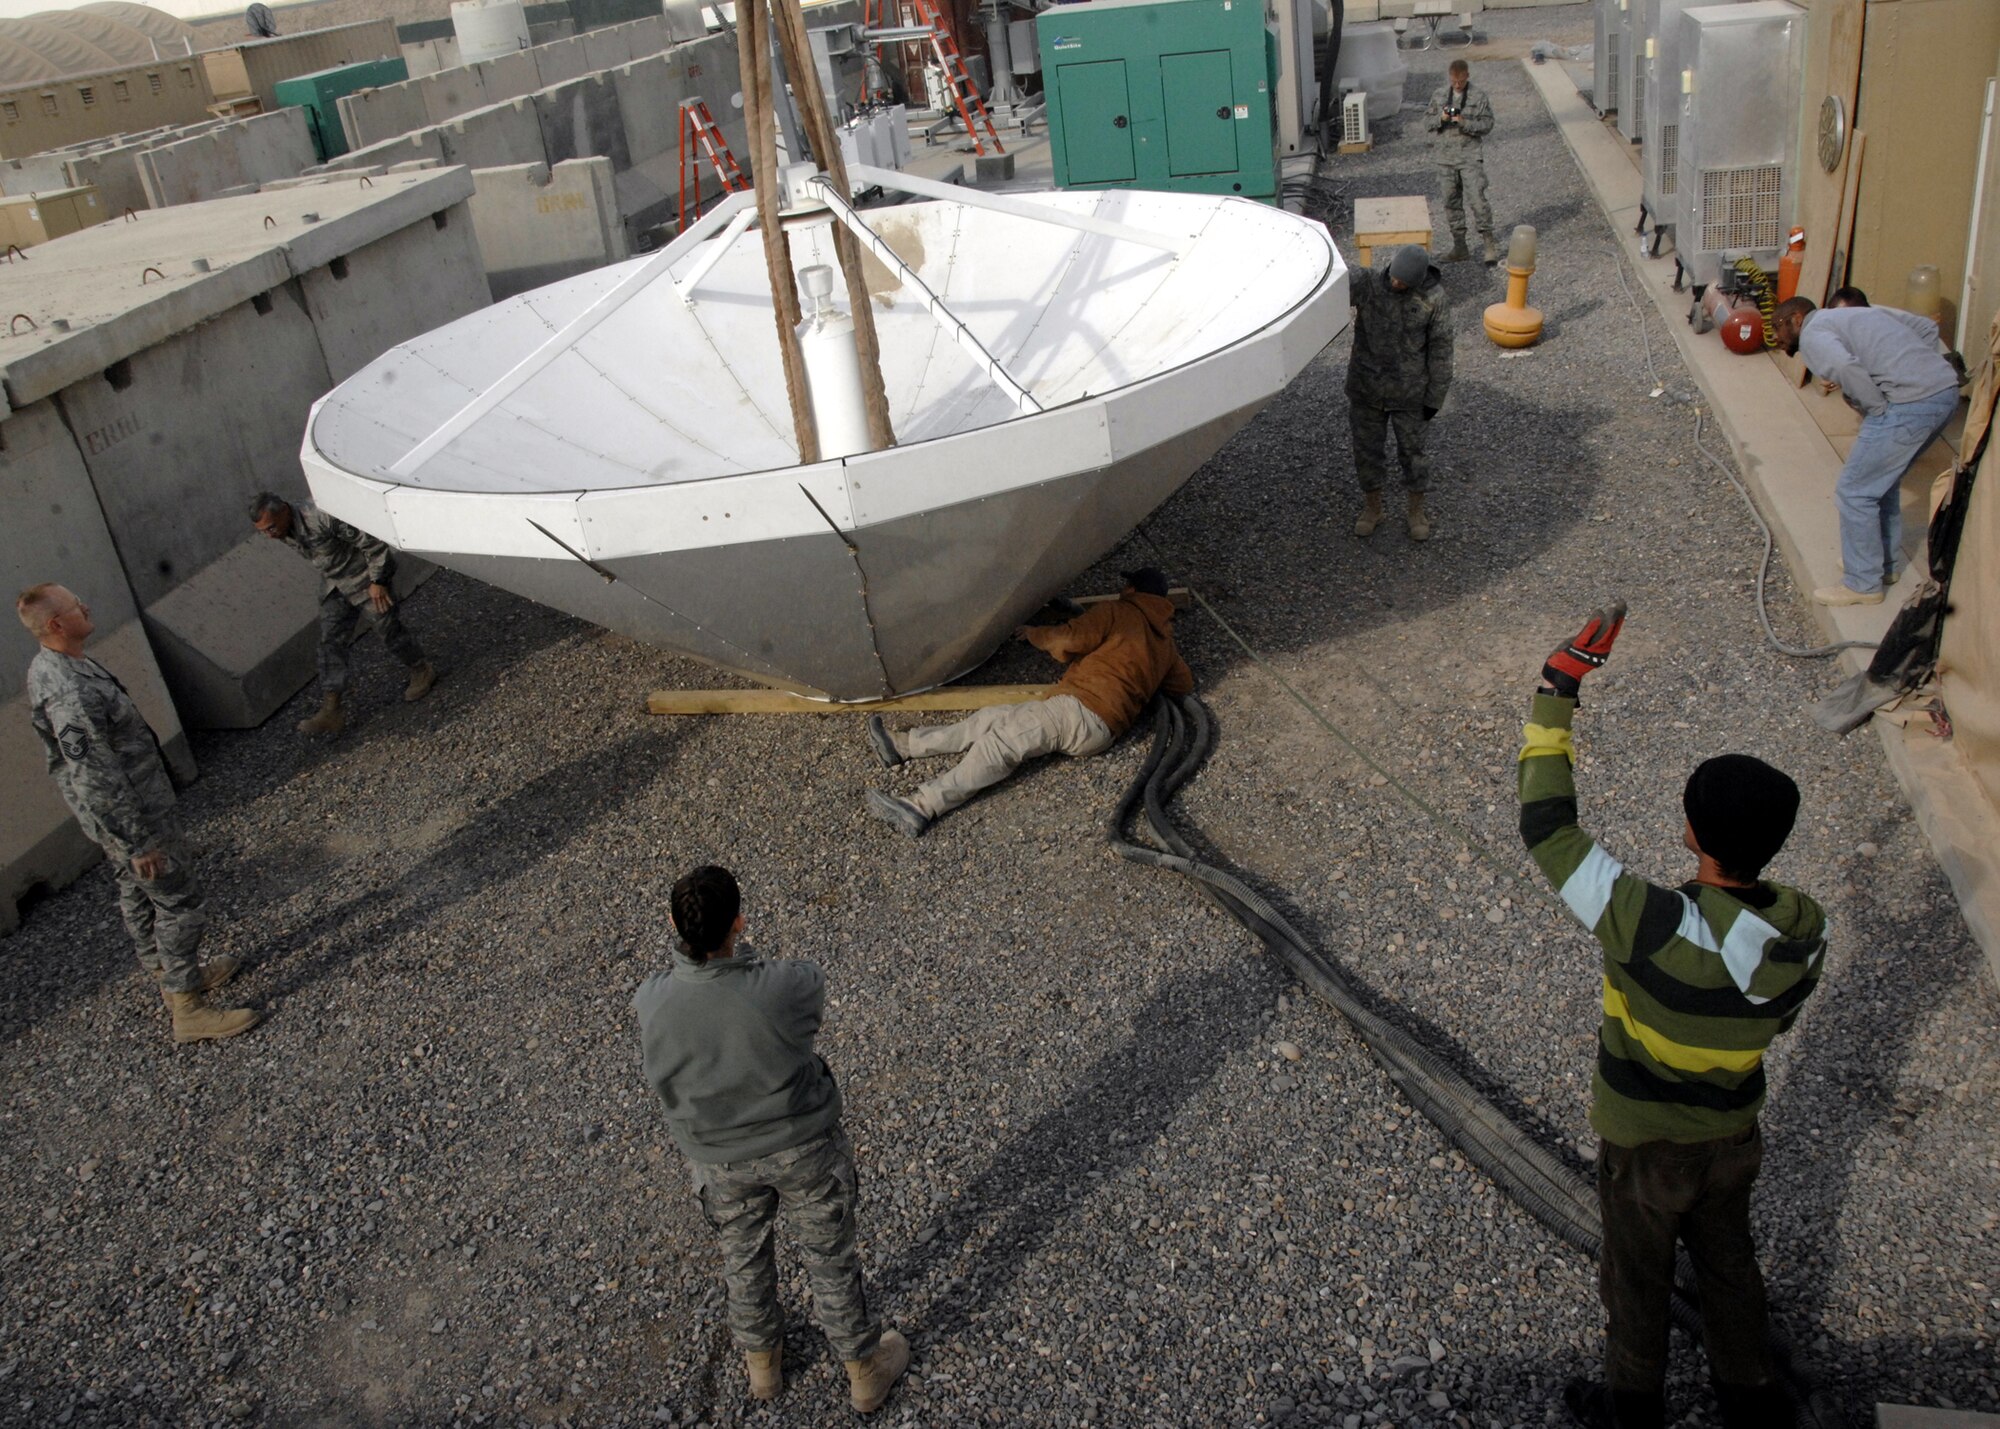 Airmen from the 451st Expeditionary Communications Squadron spot for the crane operator as a satellite dish is lowered onto wooden supports, Jan. 13, 2010. (U.S. Air Force photo/Senior Airman Timothy Taylor/Released)